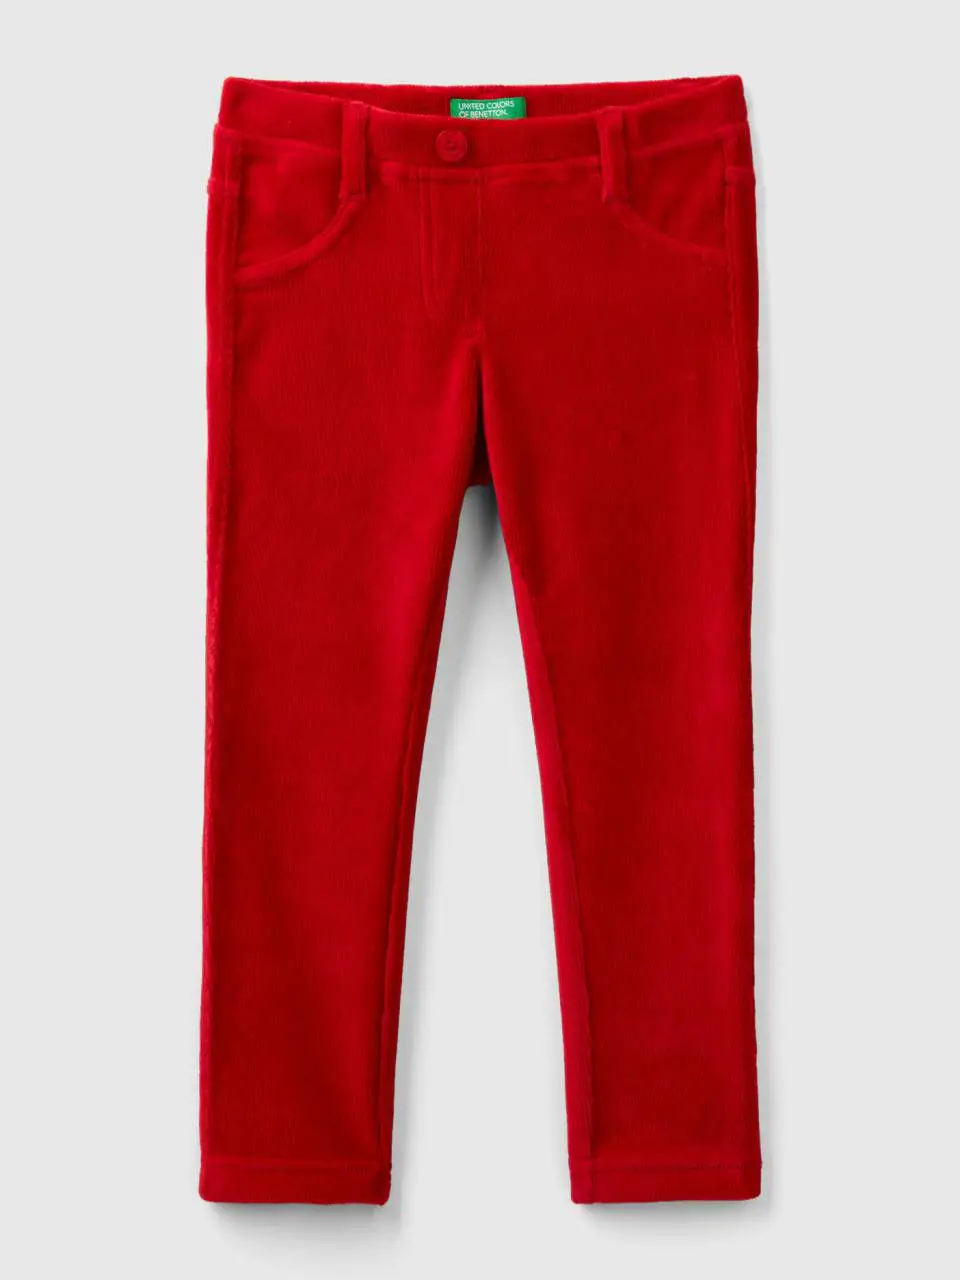 Benetton ribbed chenille trousers. 1